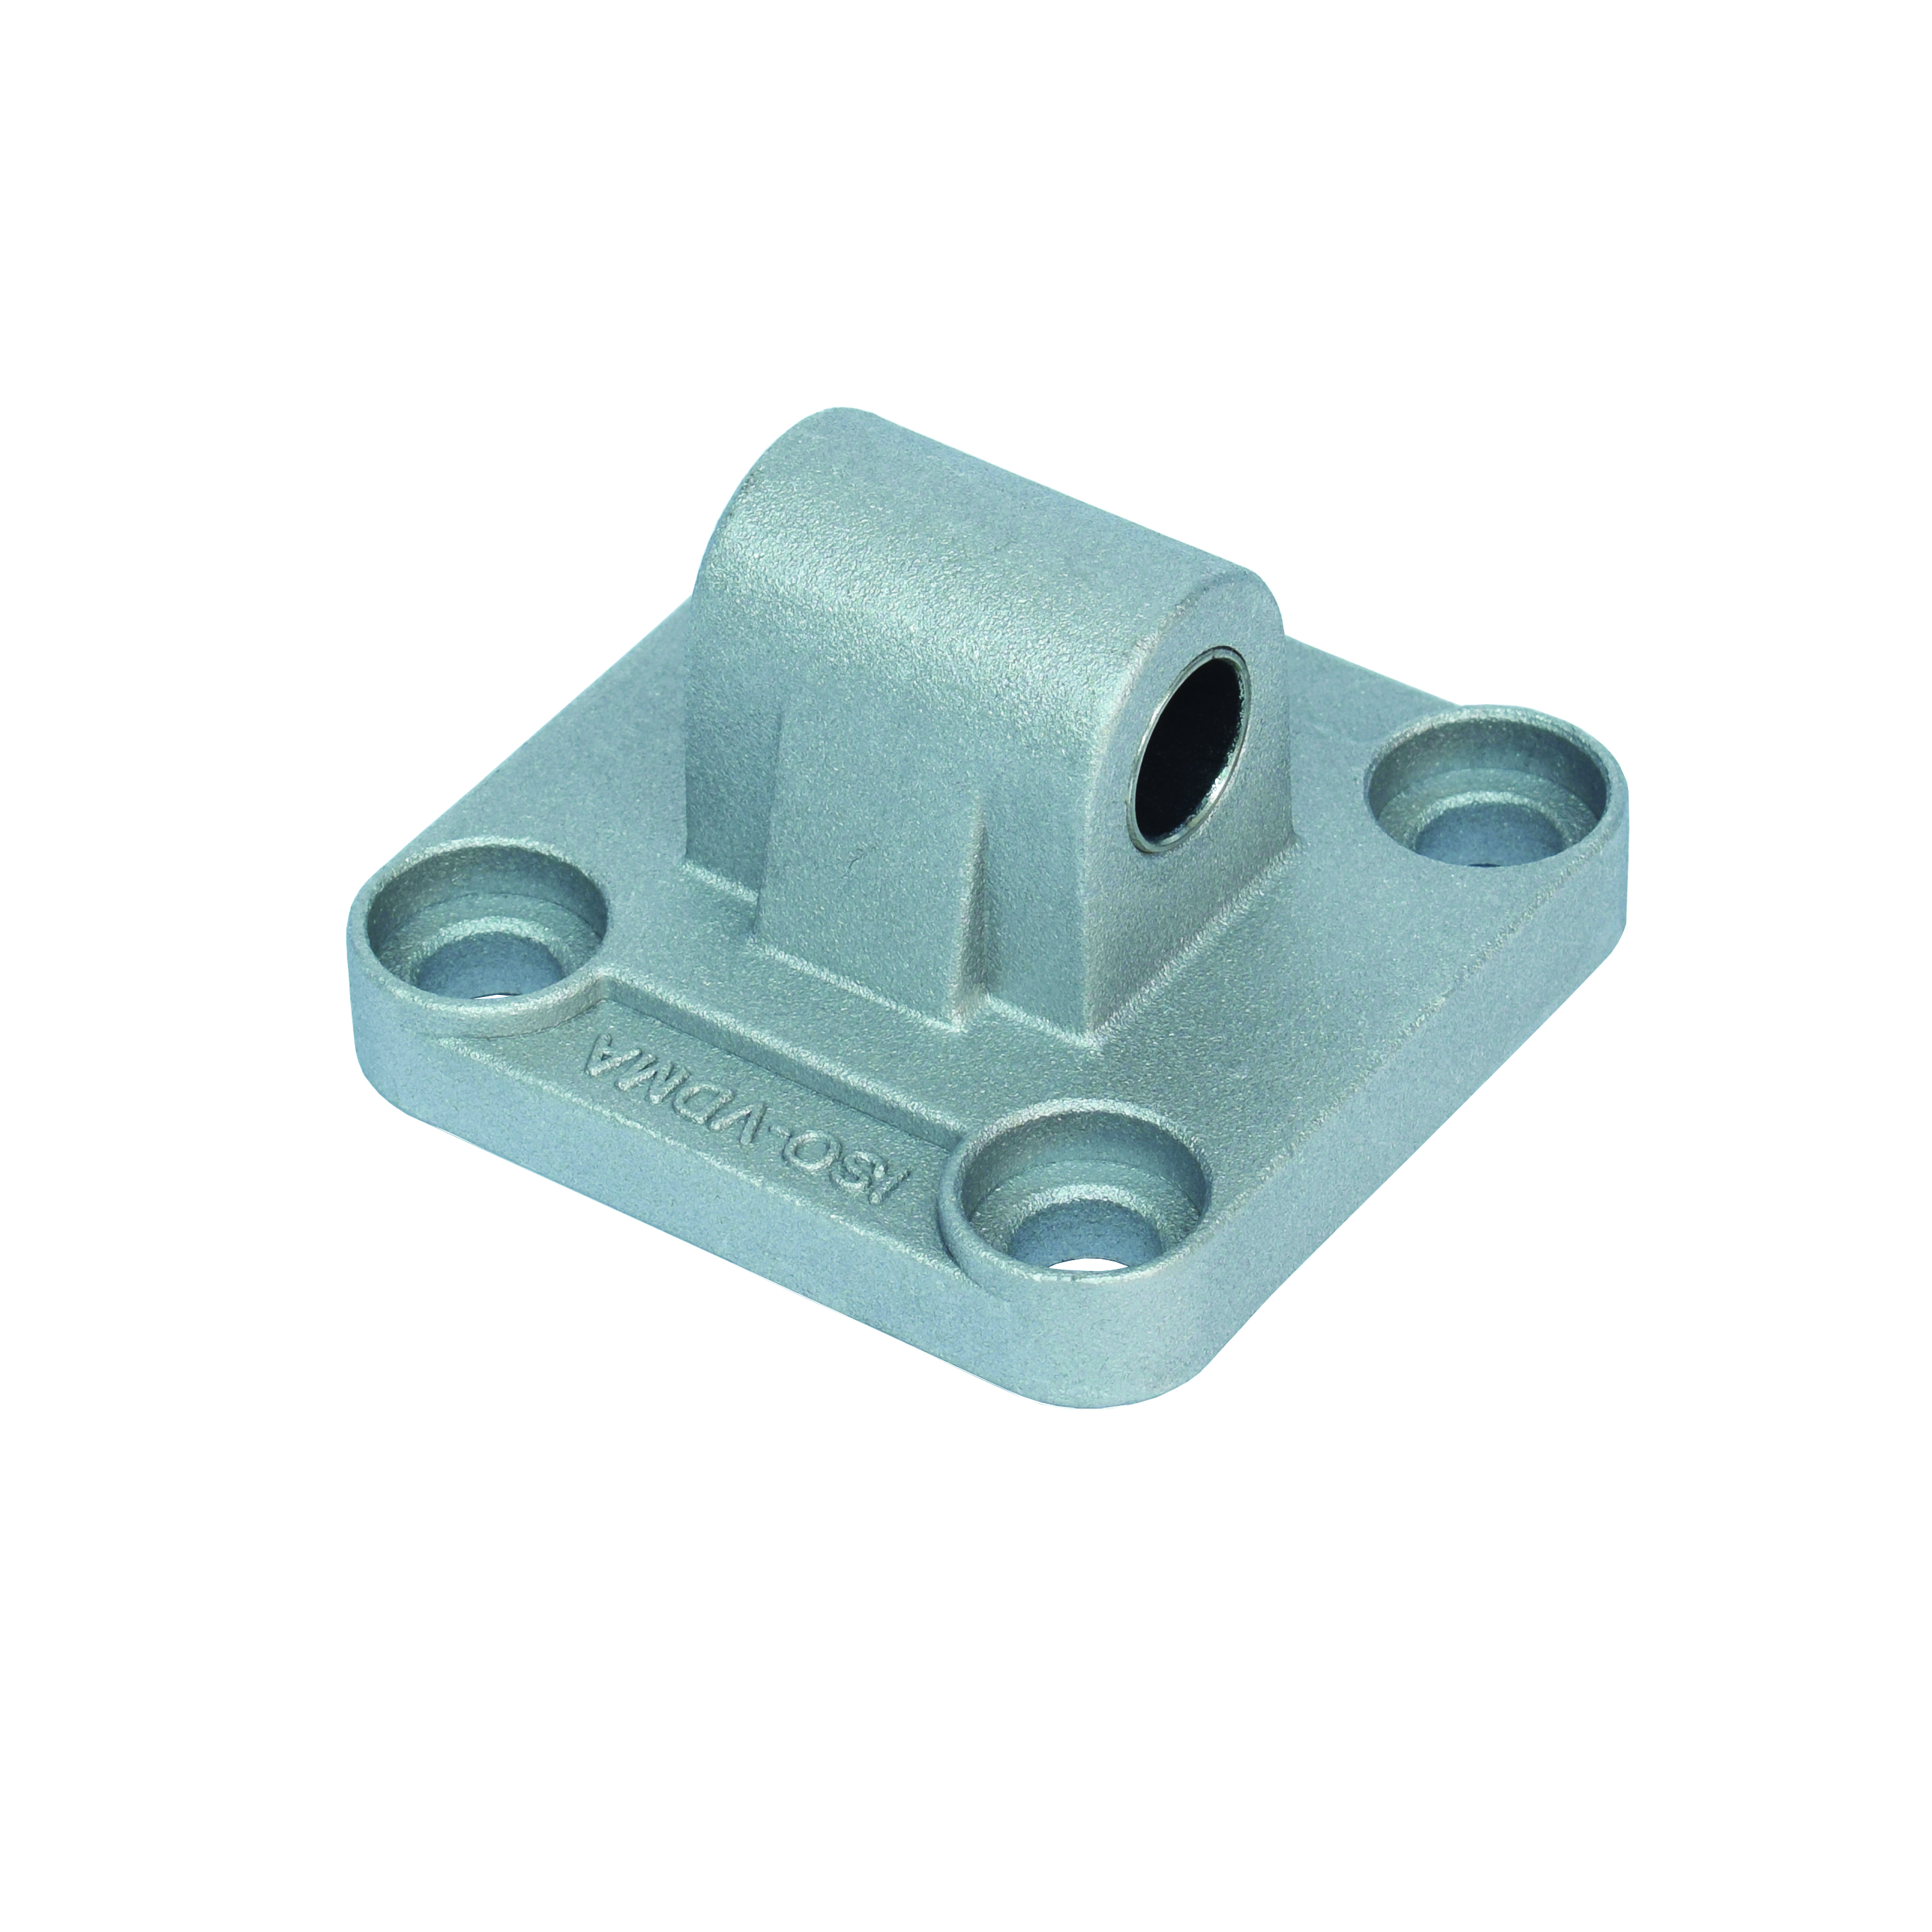 Male joints for pneumatic cylinders ISO 15552 Accessories for pneumatic cylinders ISO 15552 